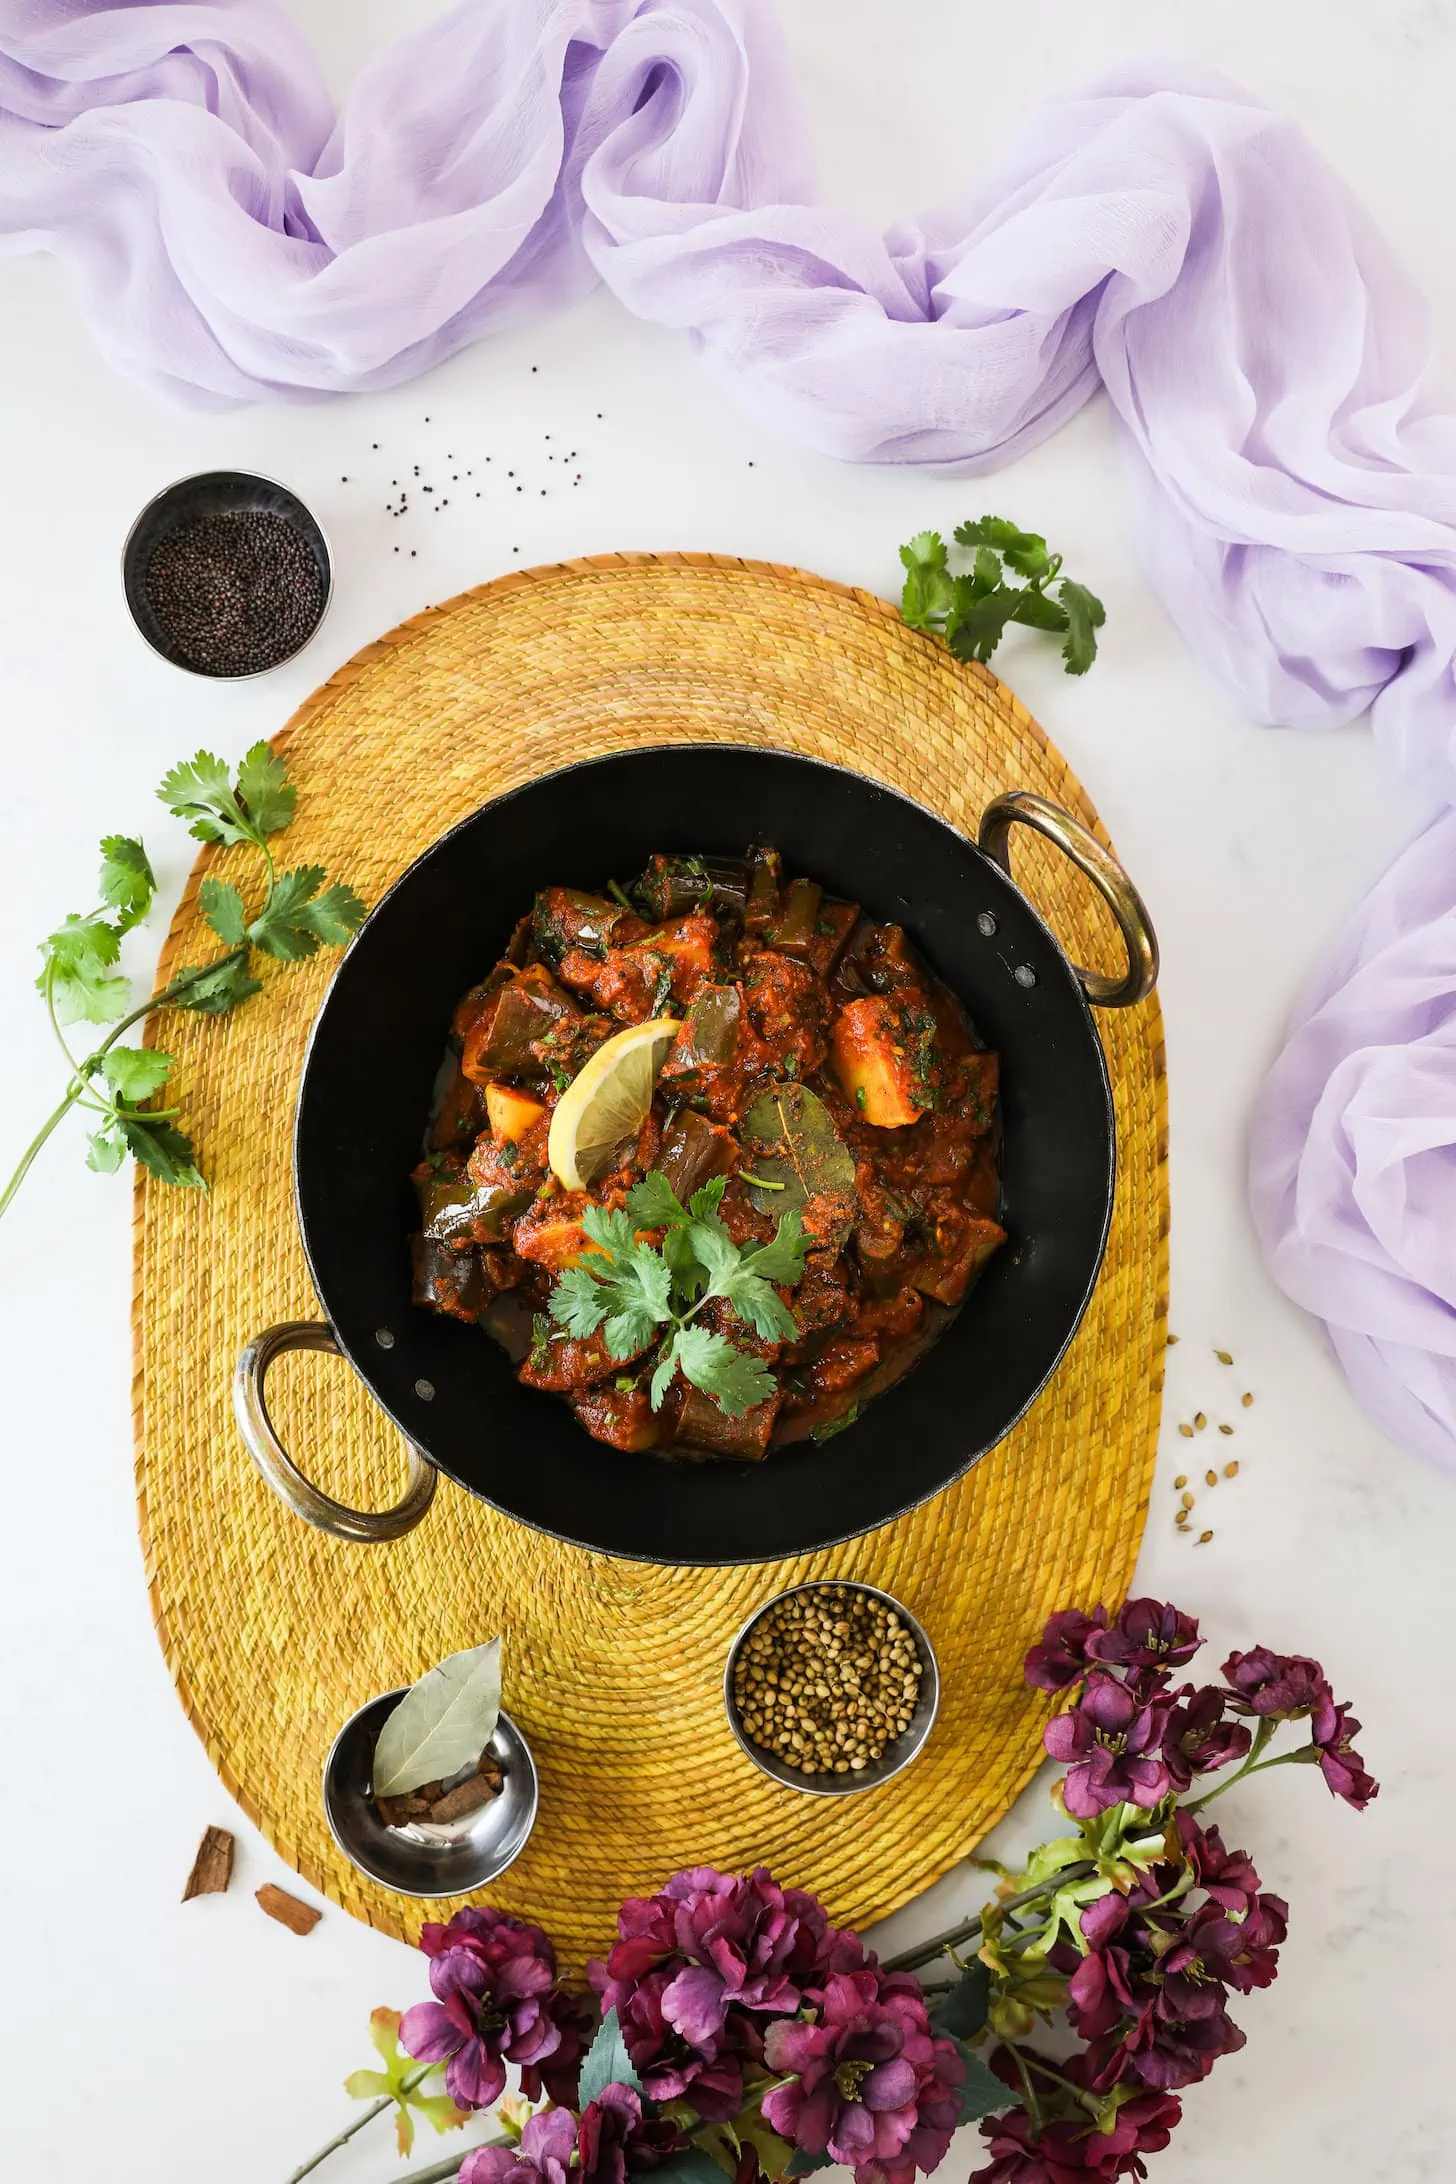 wok of cooked vegetables topped with a lemon slice and cilantro leaves on a yellow place mat styled with a lilac scarf and flowers